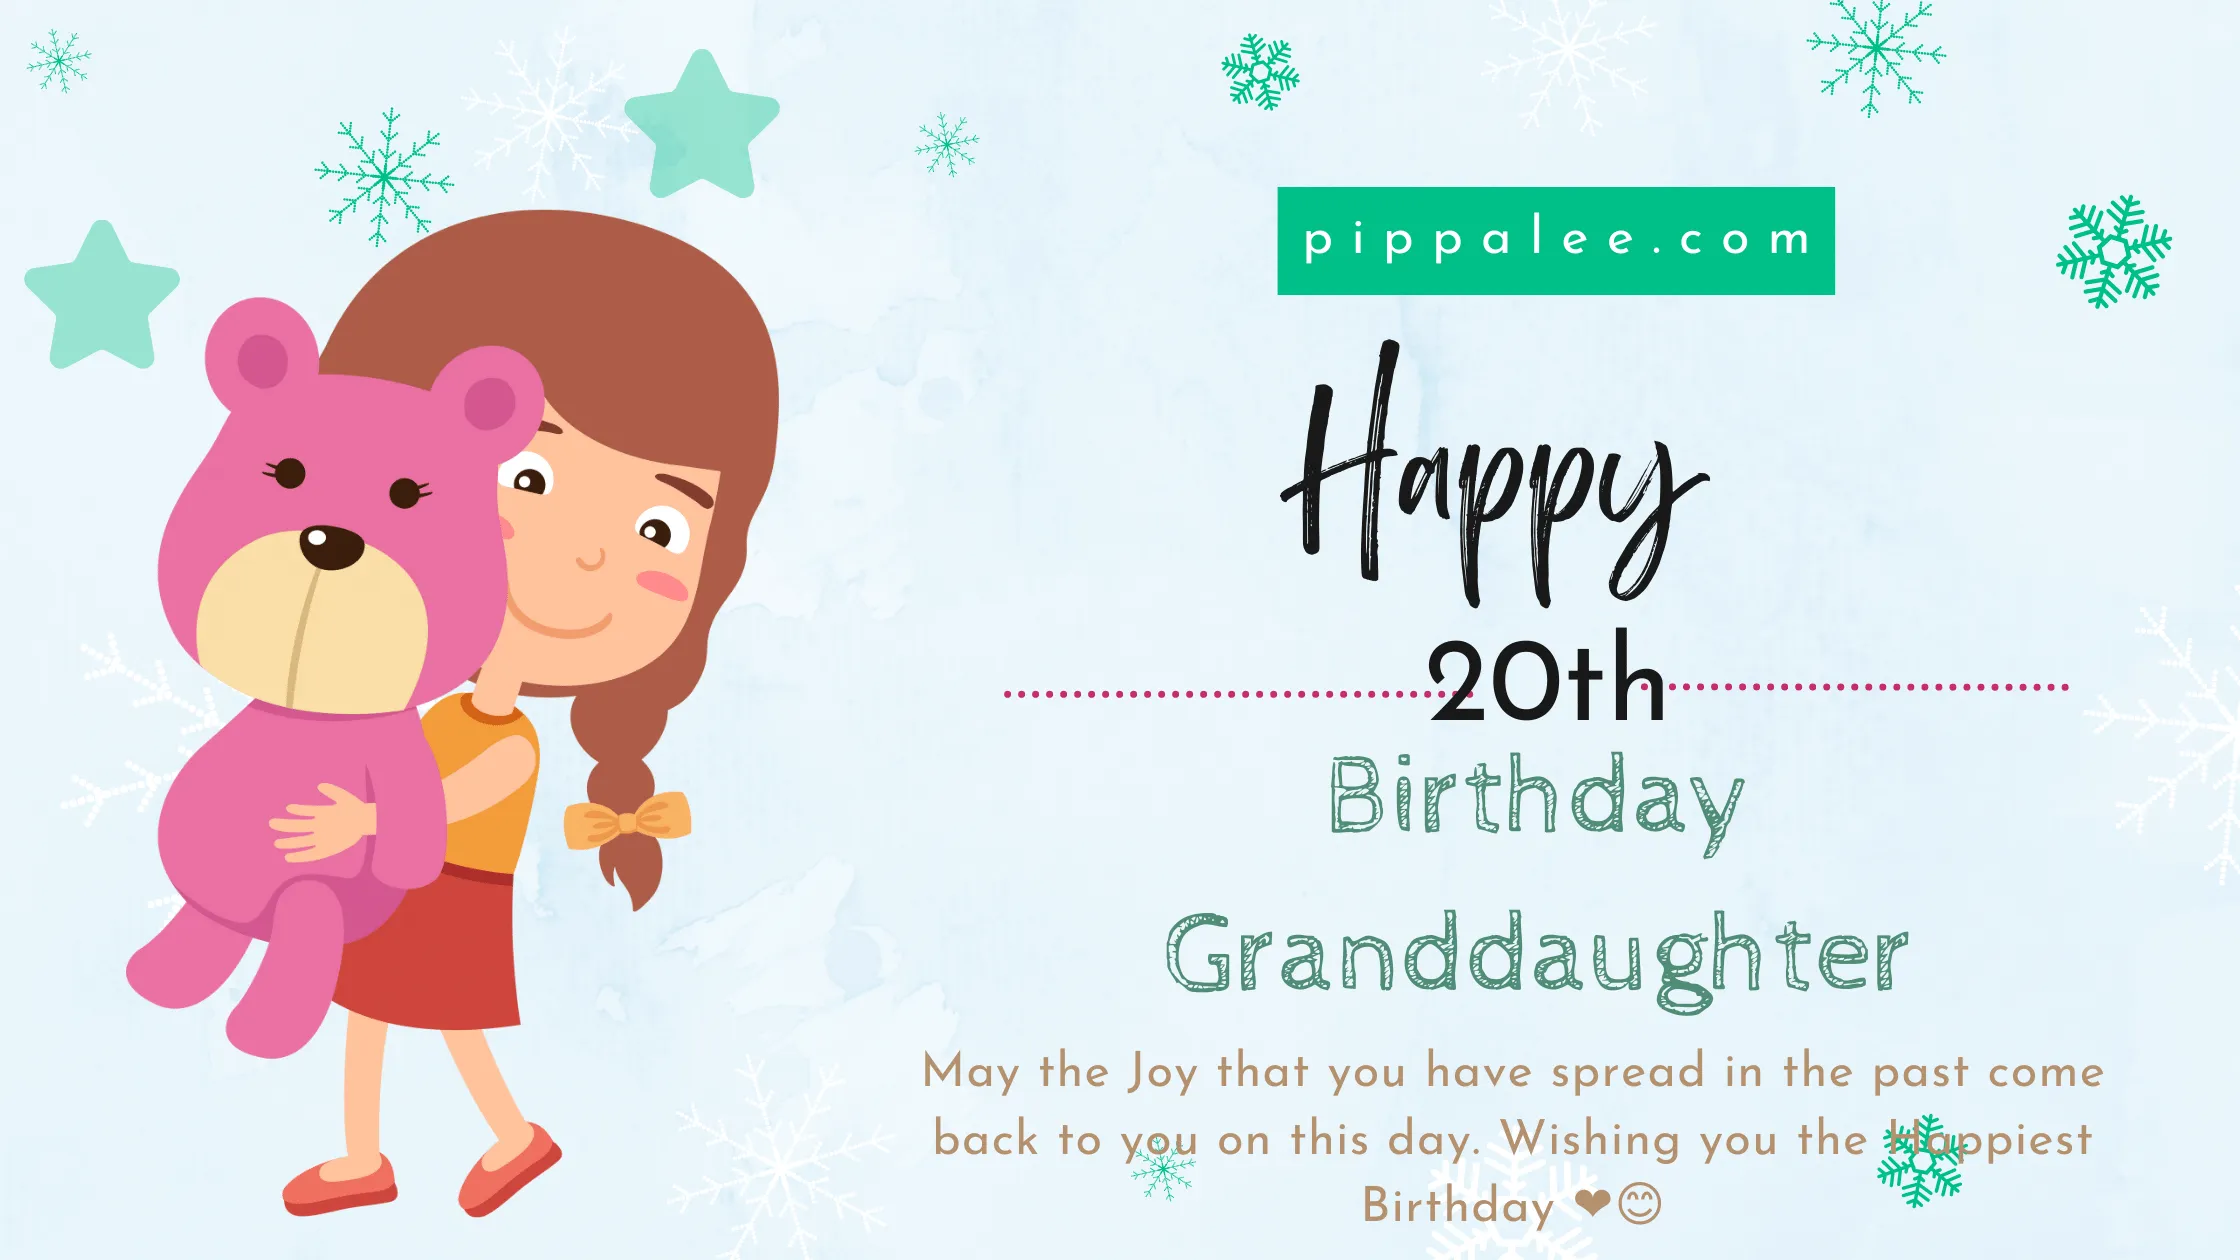 Happy 20th Birthday Granddaughter - Wishes & Messages